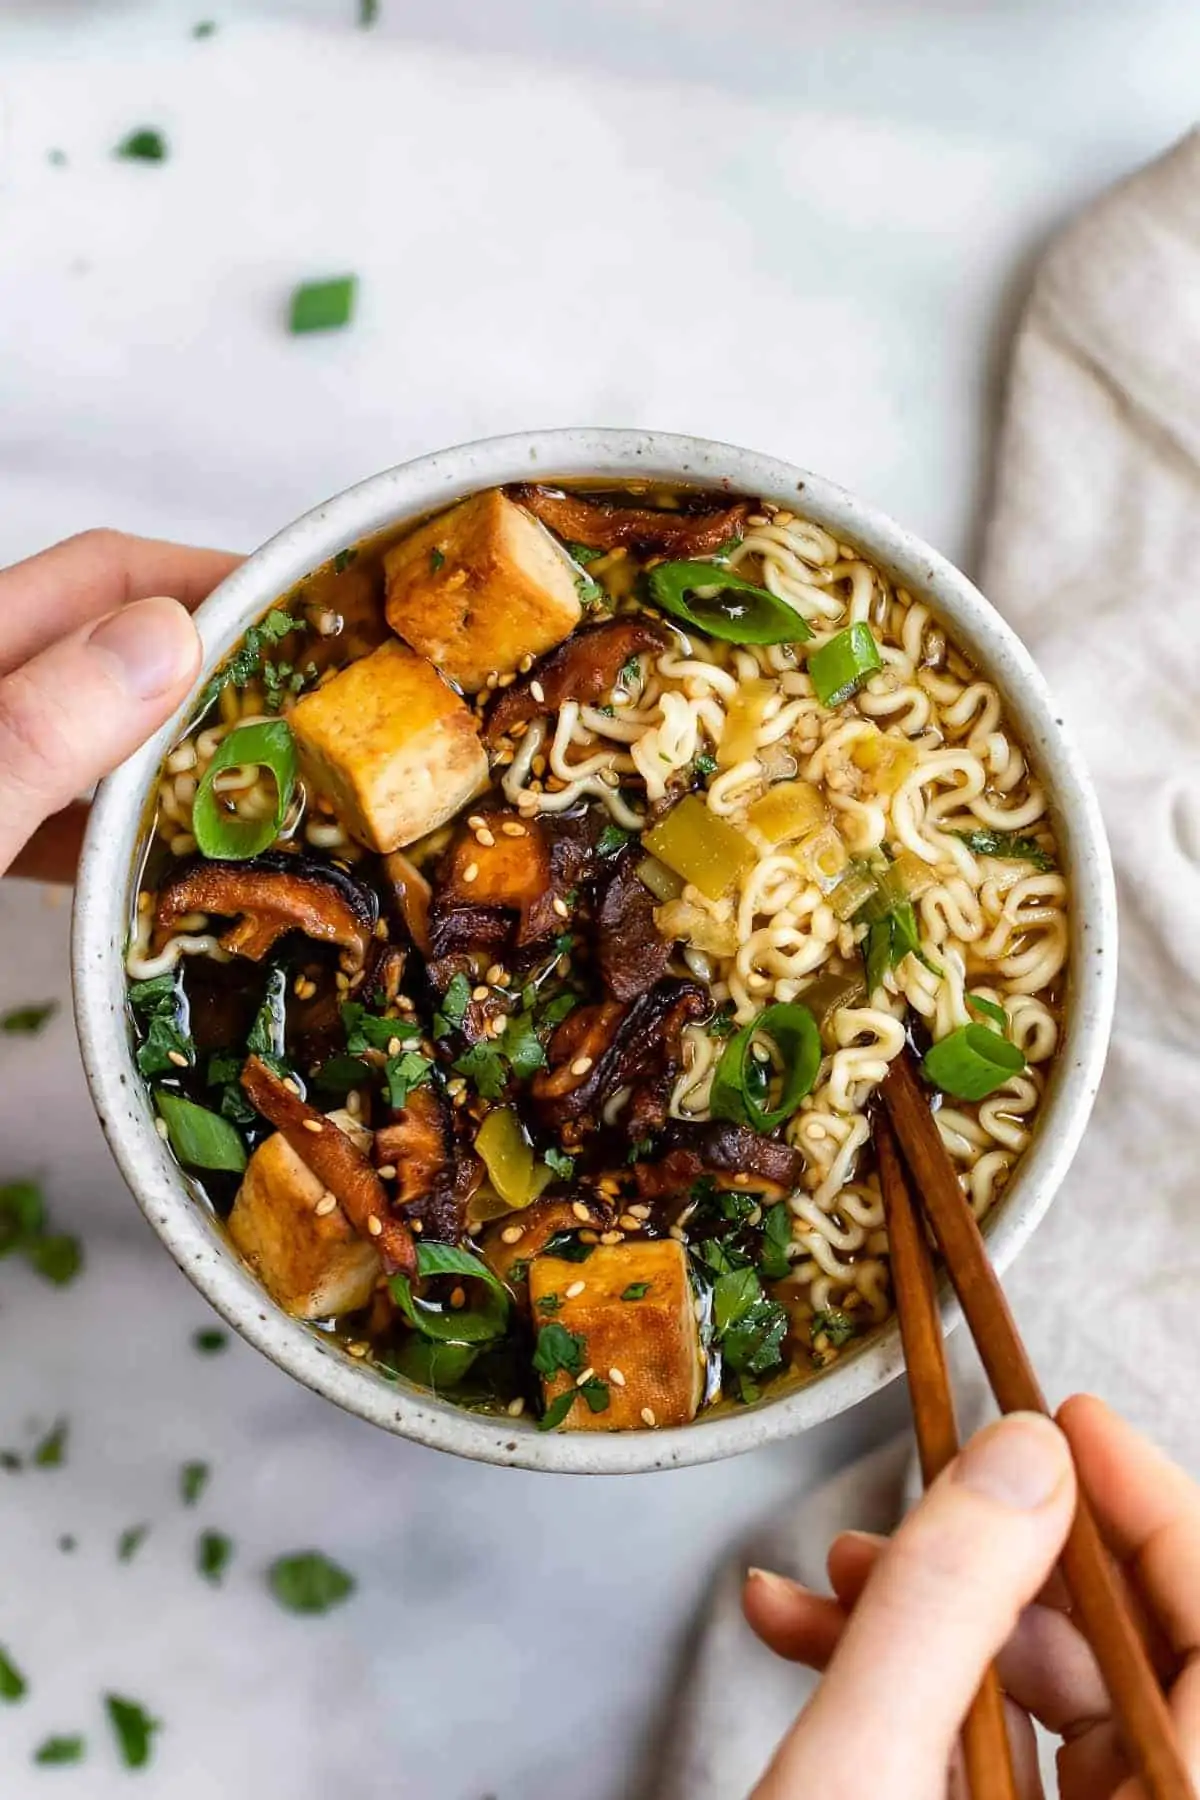 Two hands holding a bowl of vegan ramen noodles with mushrooms.